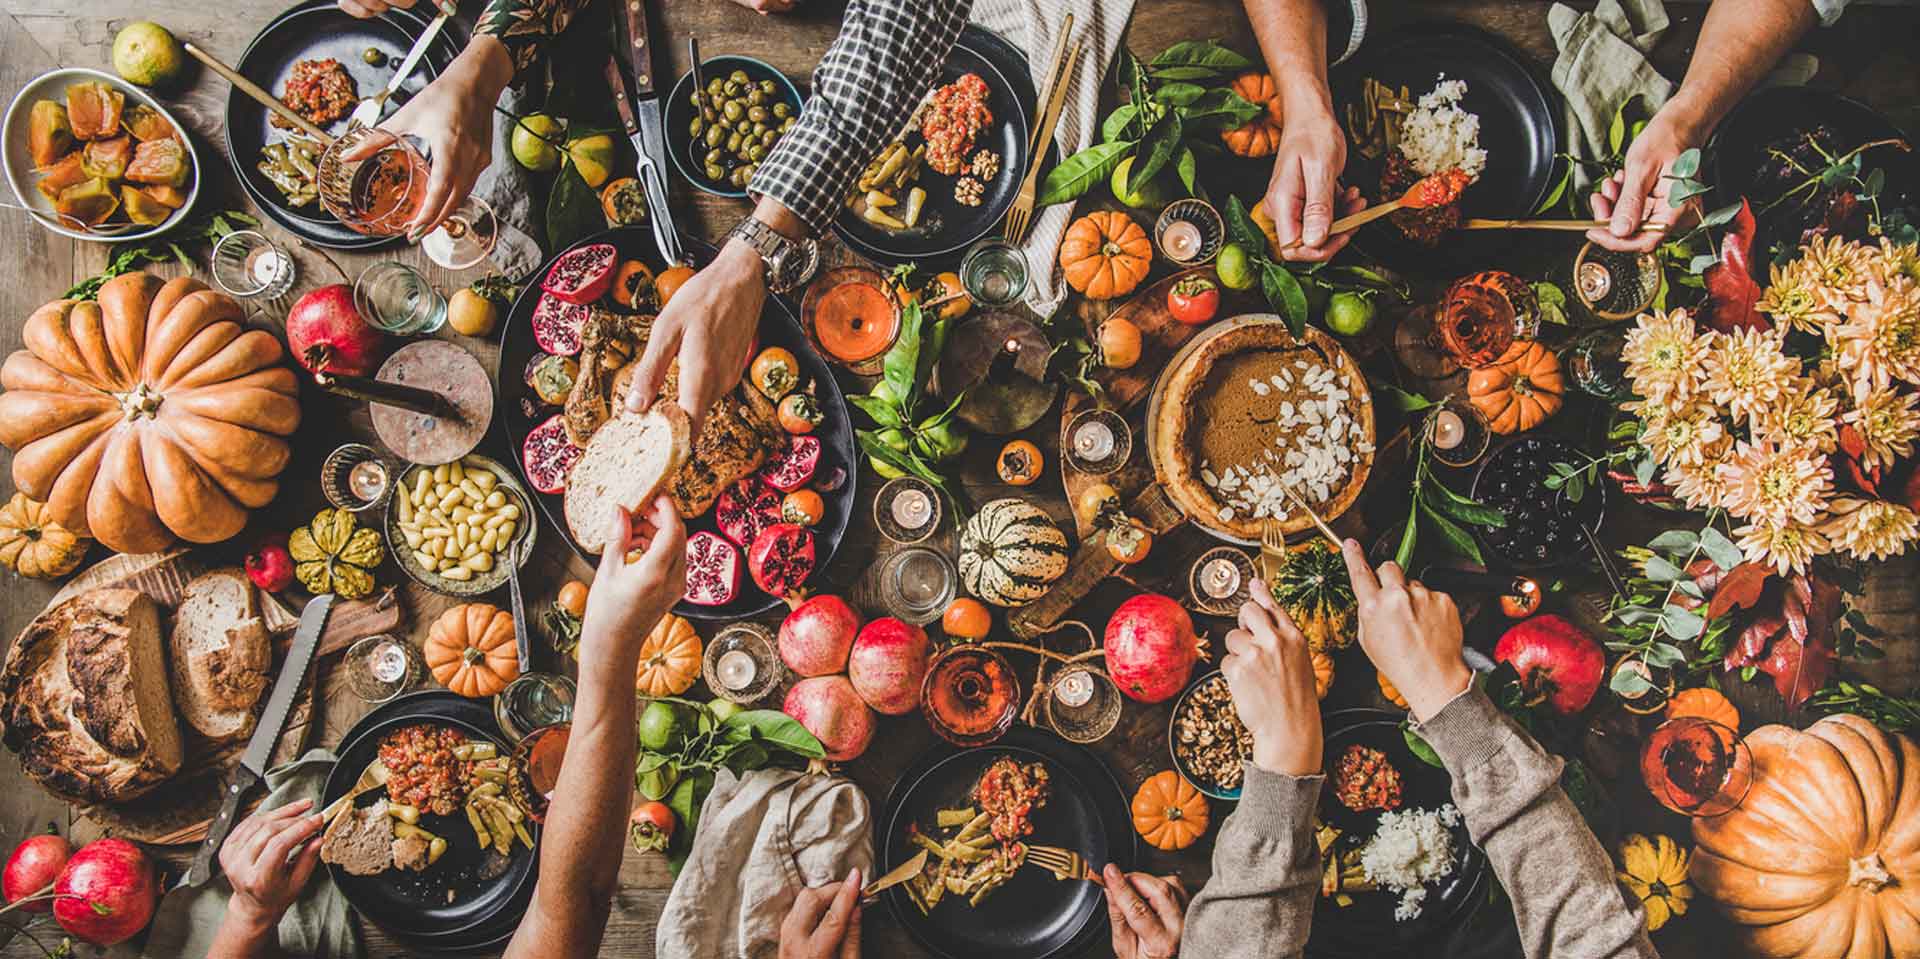 A festive autumnal feast with friends gathered around a table laden with seasonal produce, New Age products, and hearty dishes, sharing the warmth of good company.